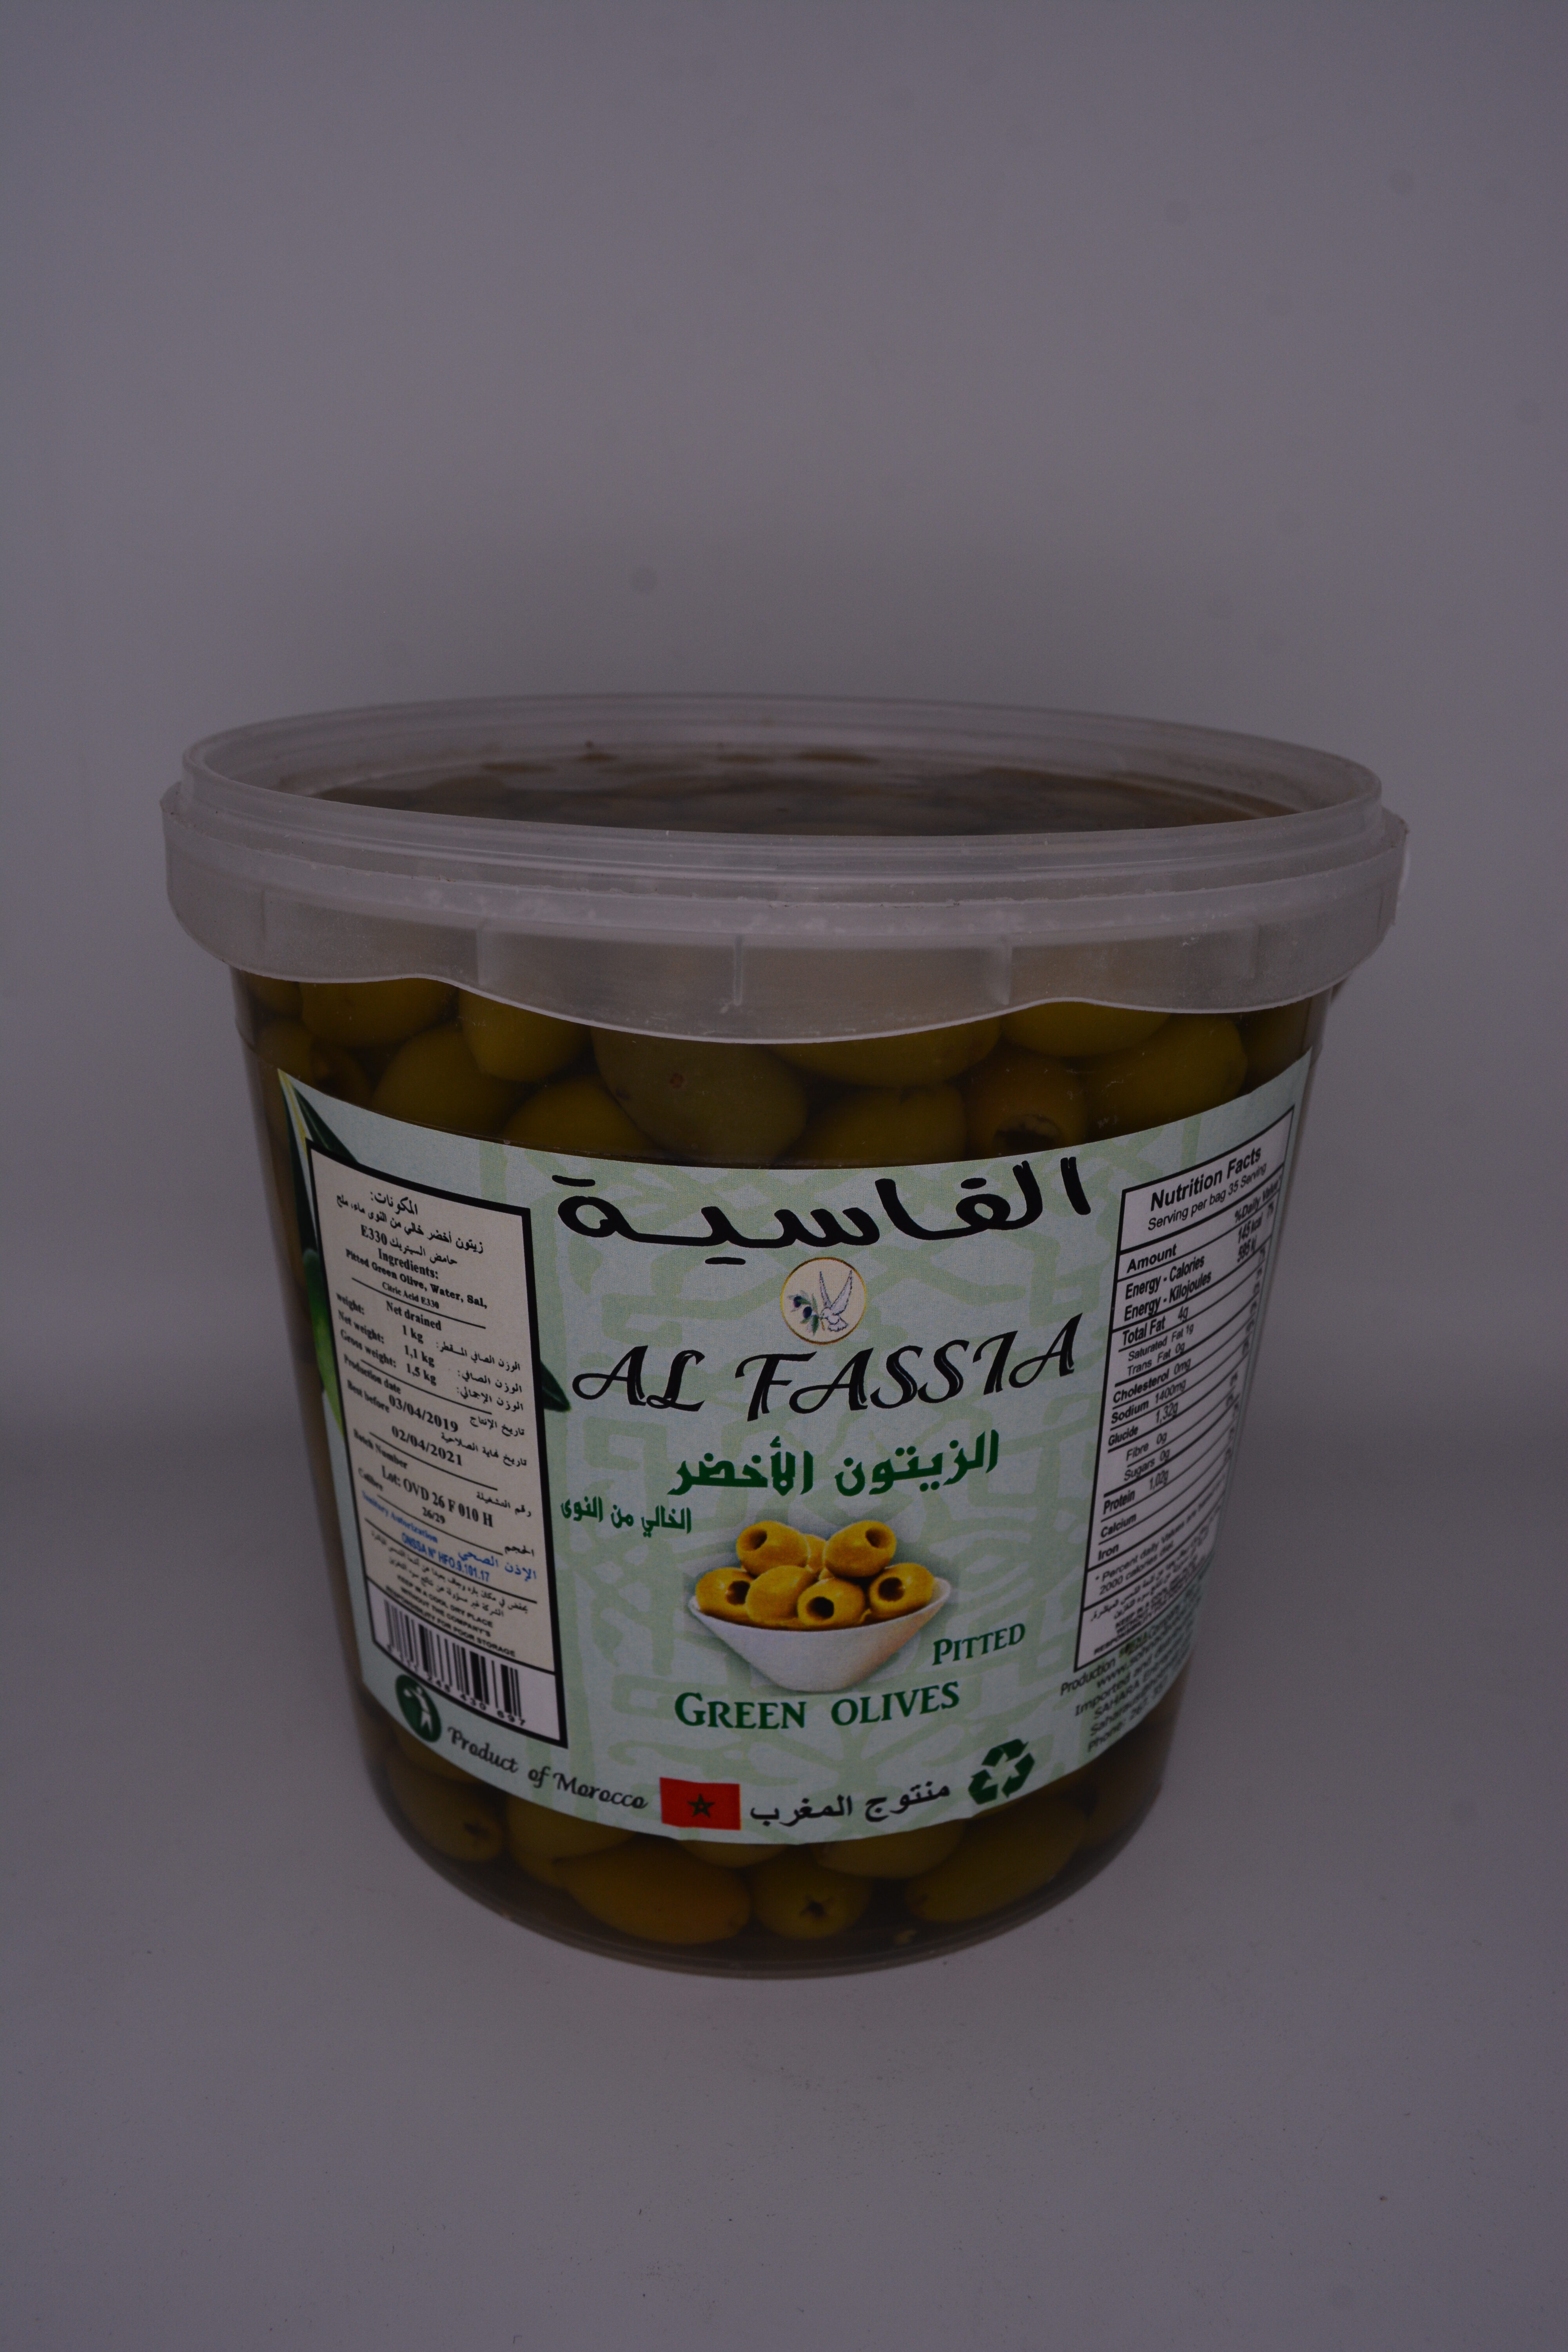 AL FASSIA PITTED GREEN OLIVES - Producte - en